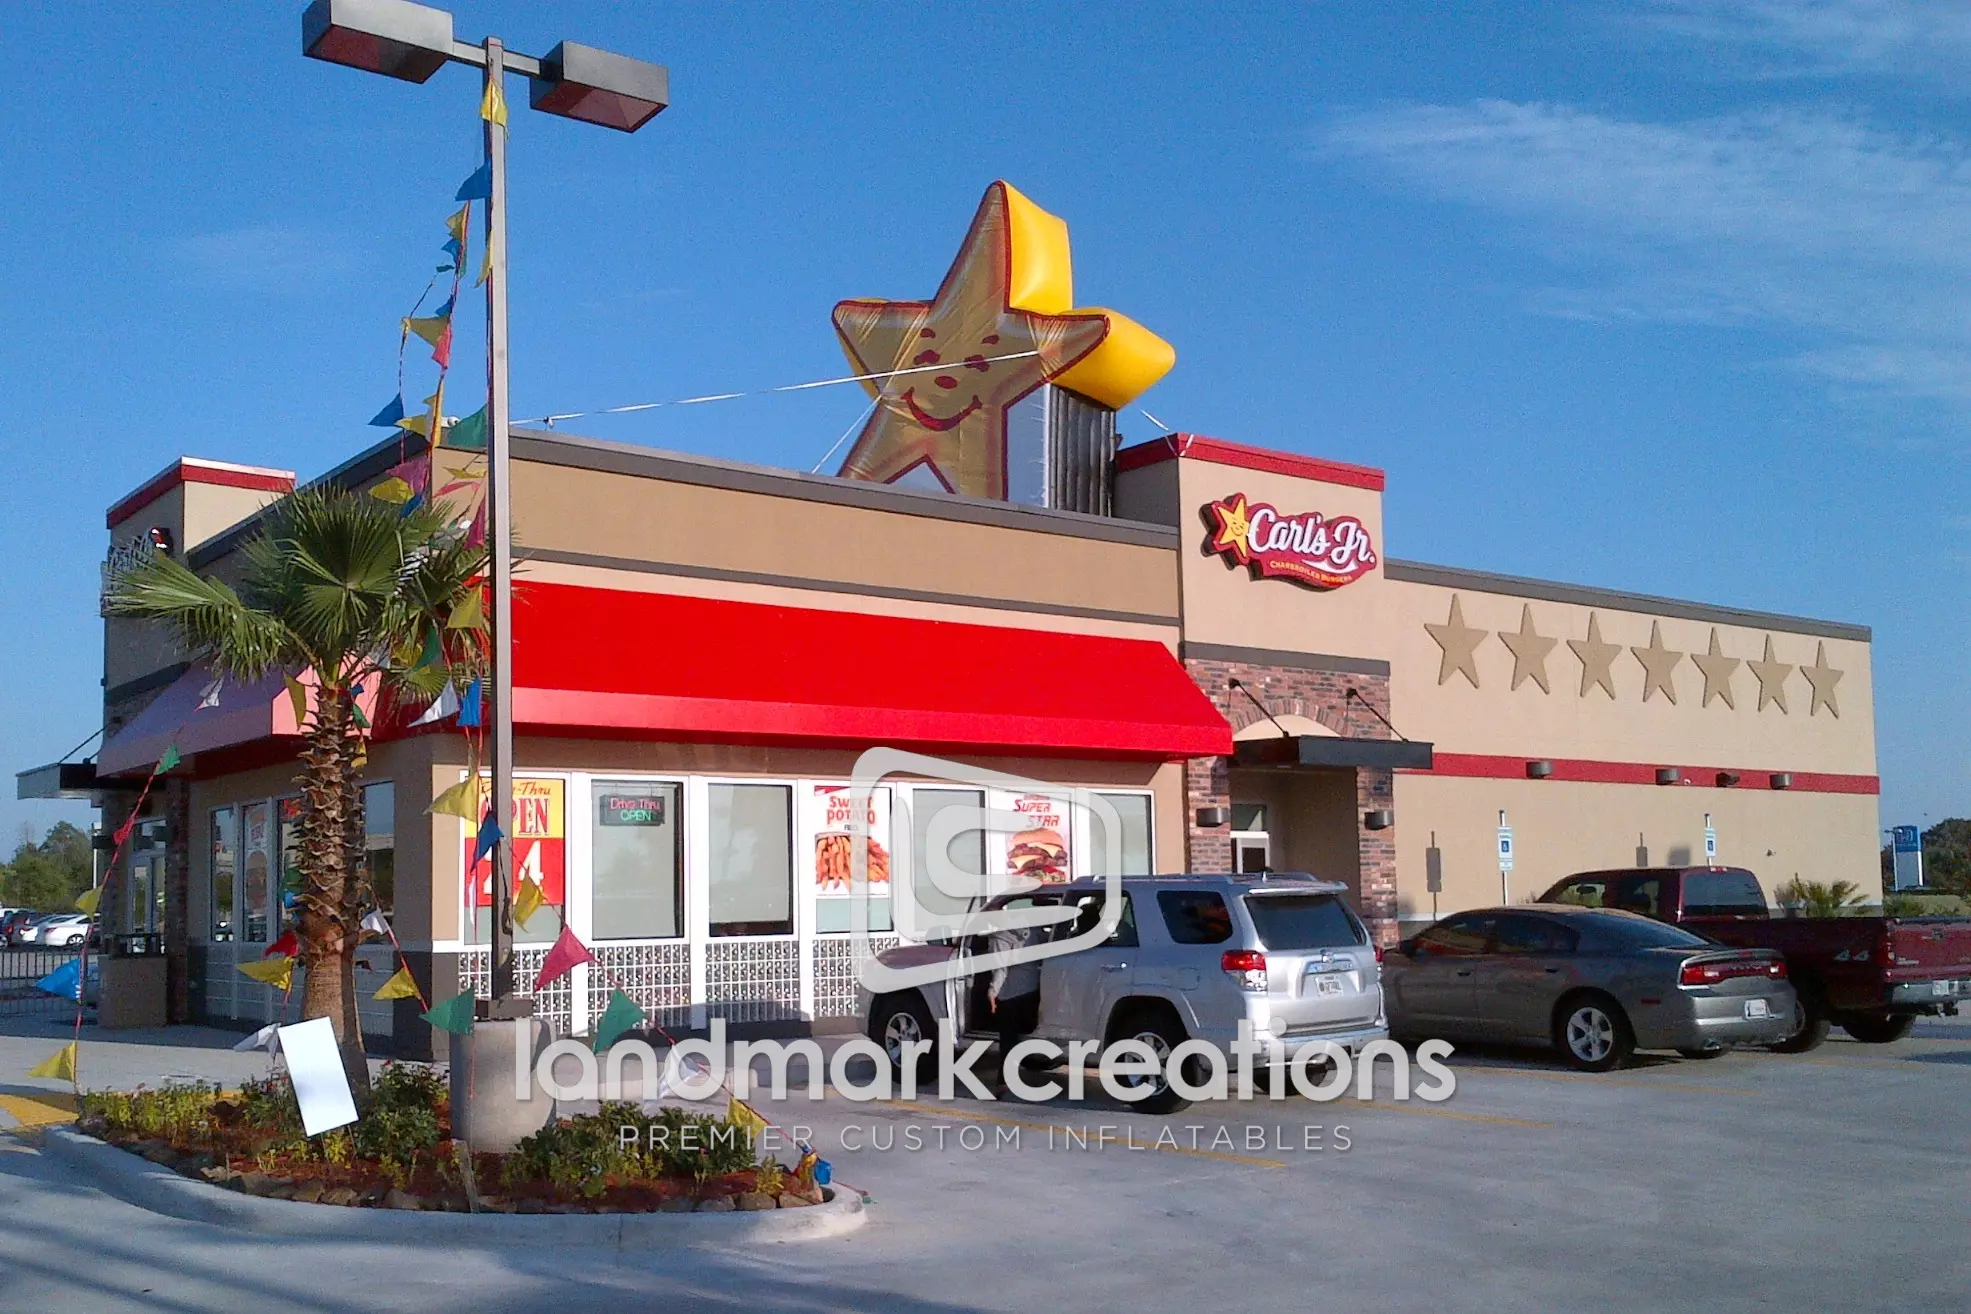 Carl's Jr. Inflatable Happy Star Billboard on Franchise Rooftop